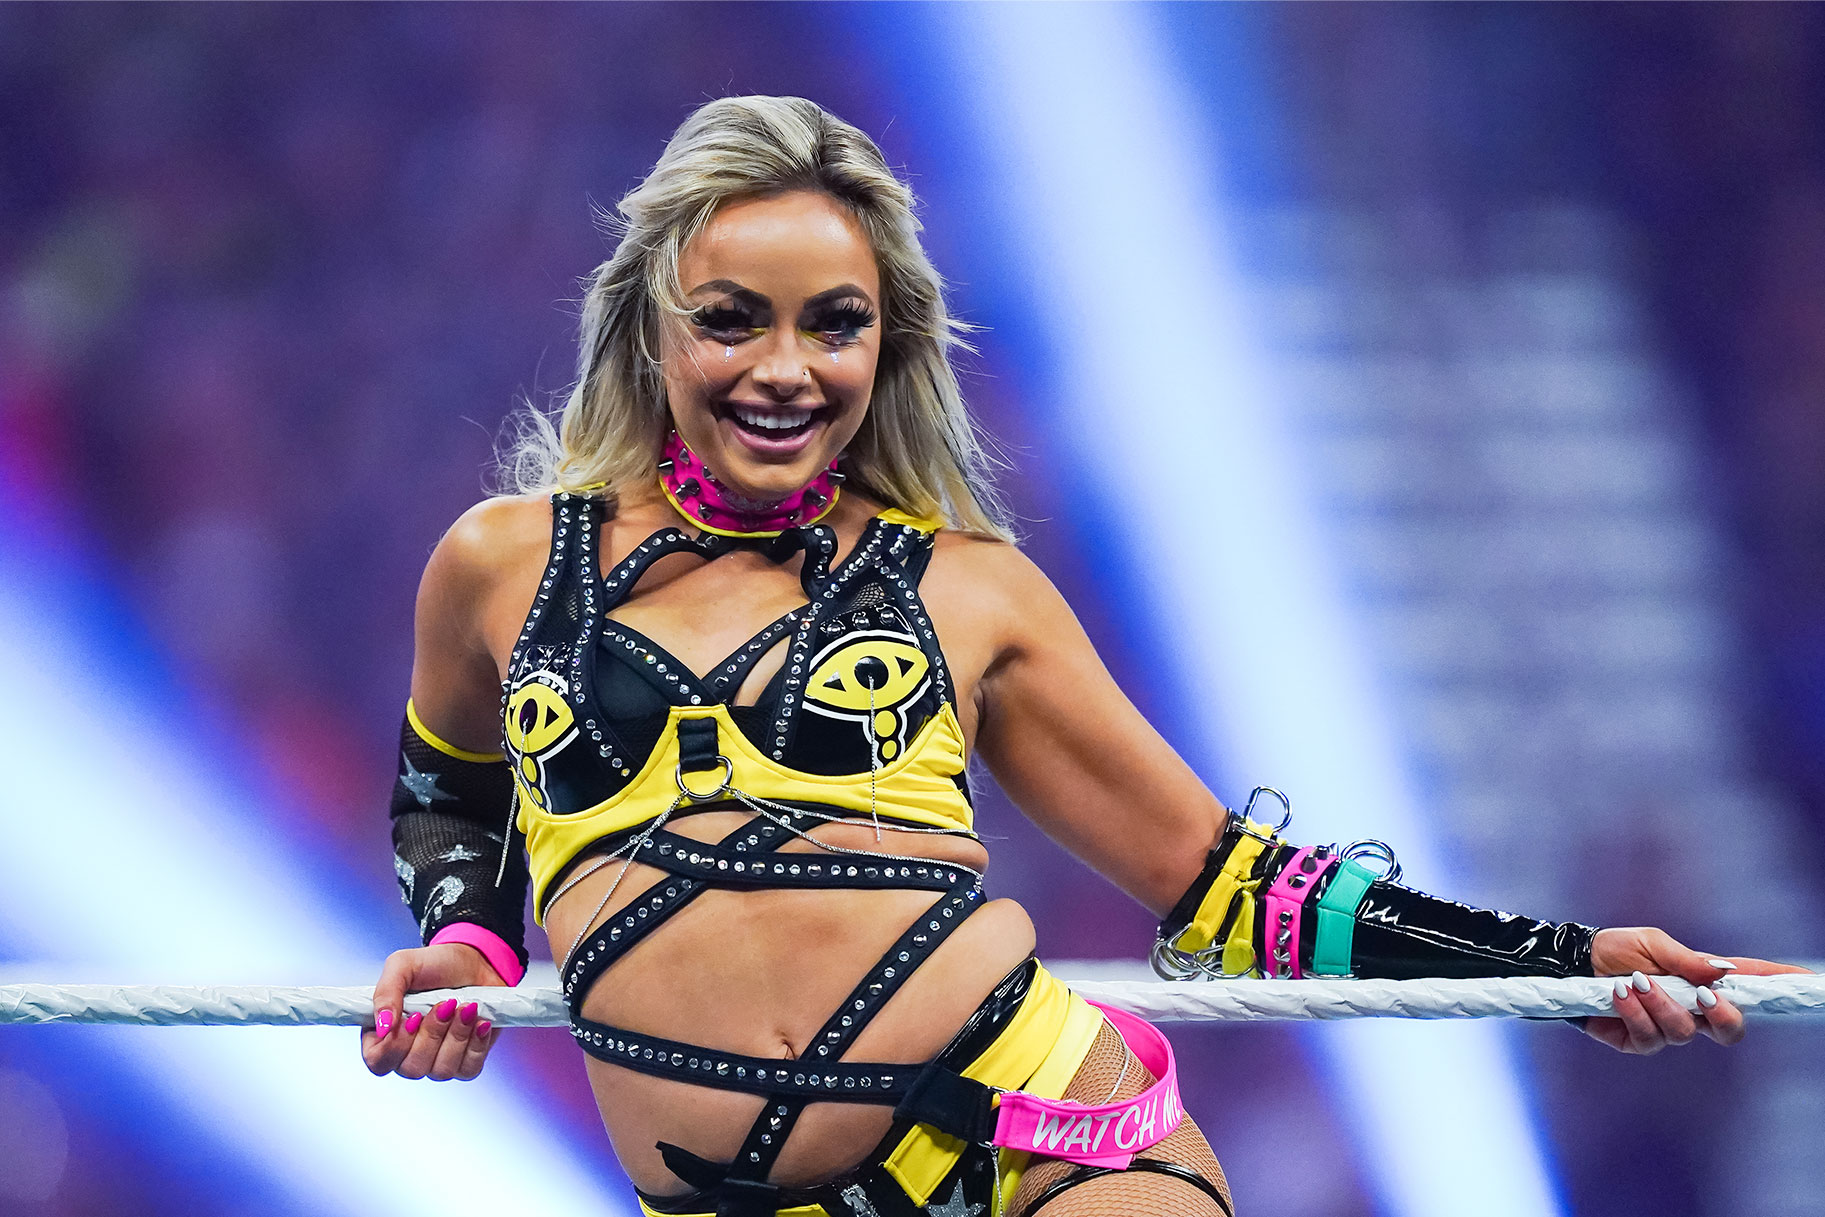 Liv Morgan in the ring